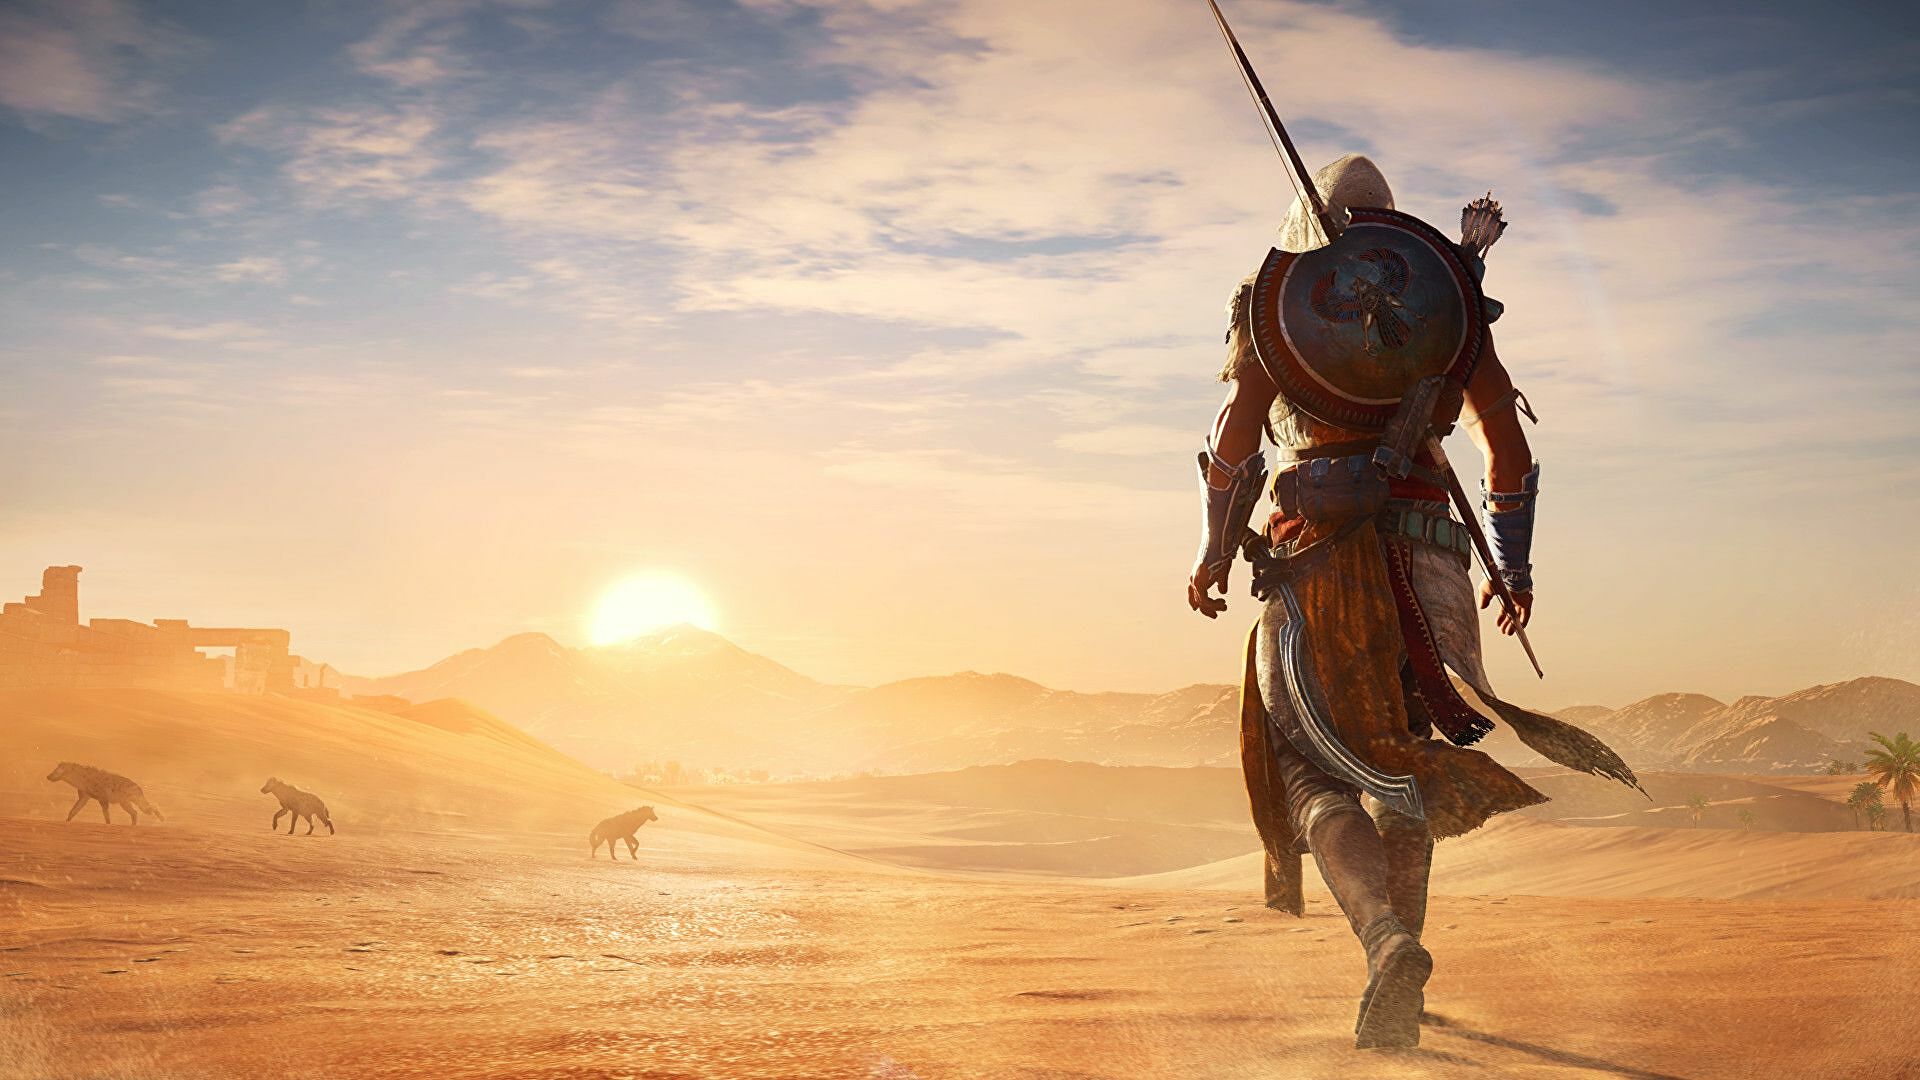 Looks like Assassin's Creed Origins gets 60fps PS5, Xbox Series X/S update soon